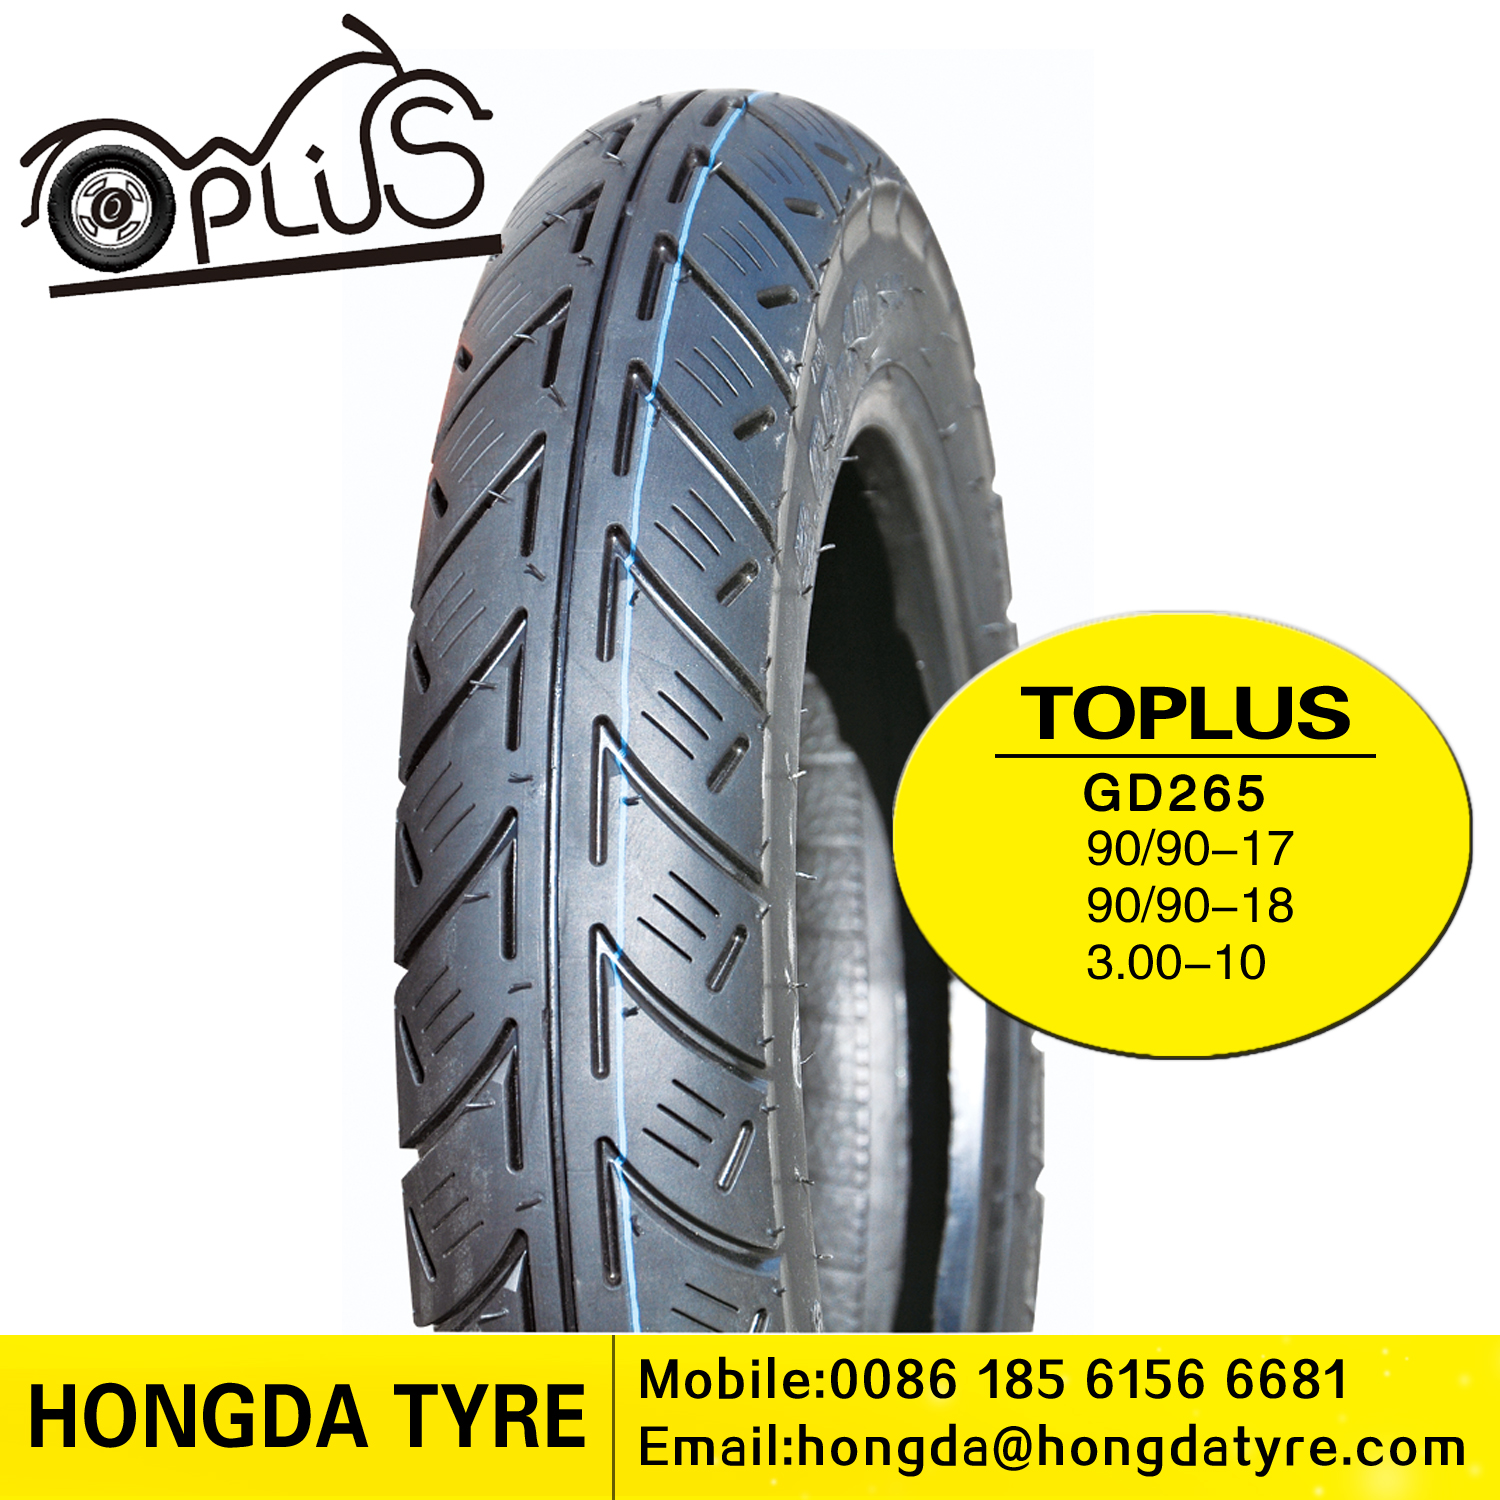 Motorcycle tyre GD265